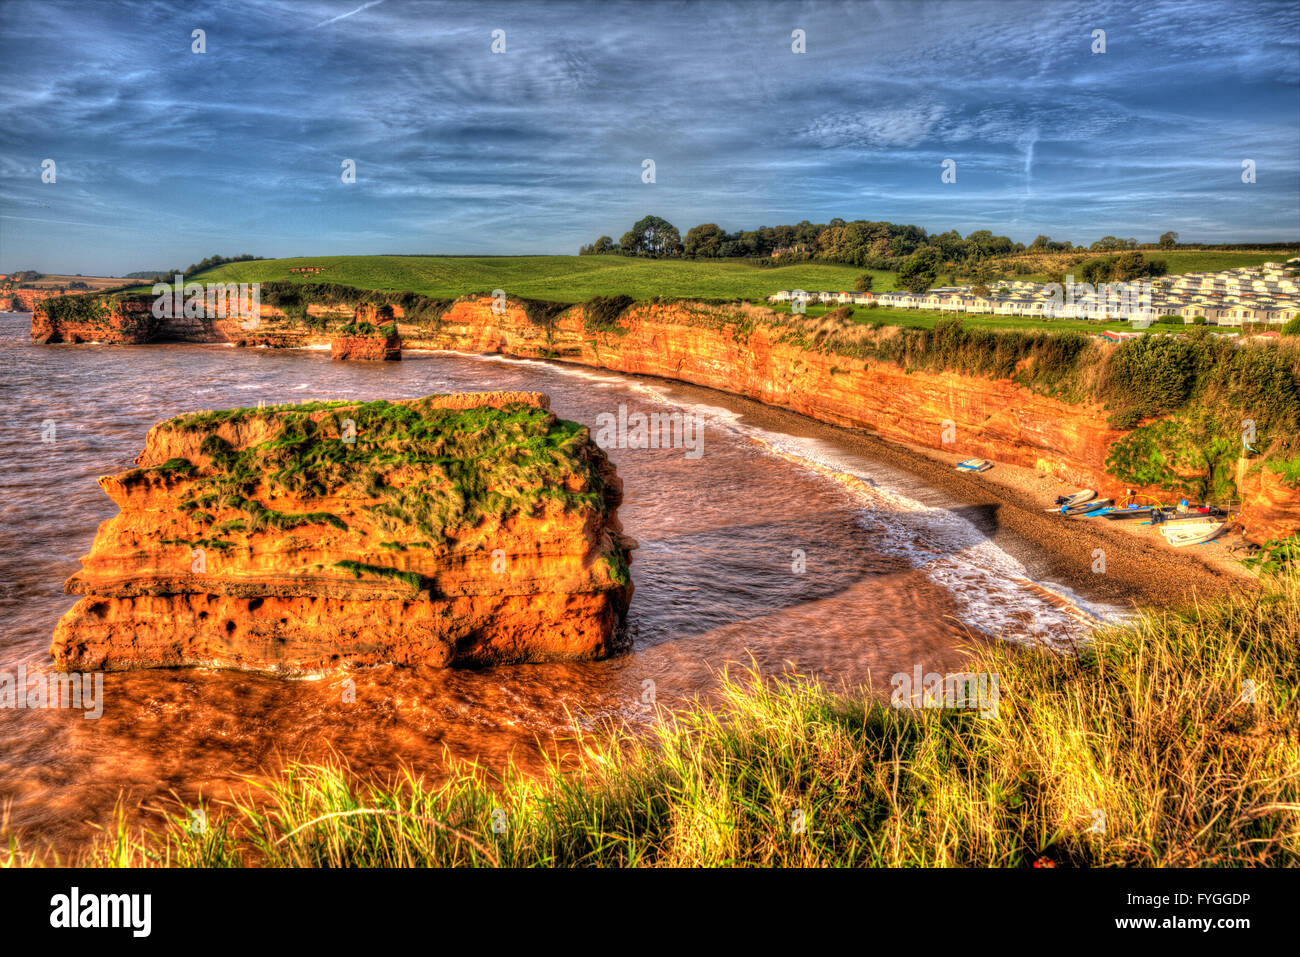 Ladram Bay Devon England UK located between Budleigh Salterton and Sidmouth and on the Jurassic Coast in HDR Stock Photo